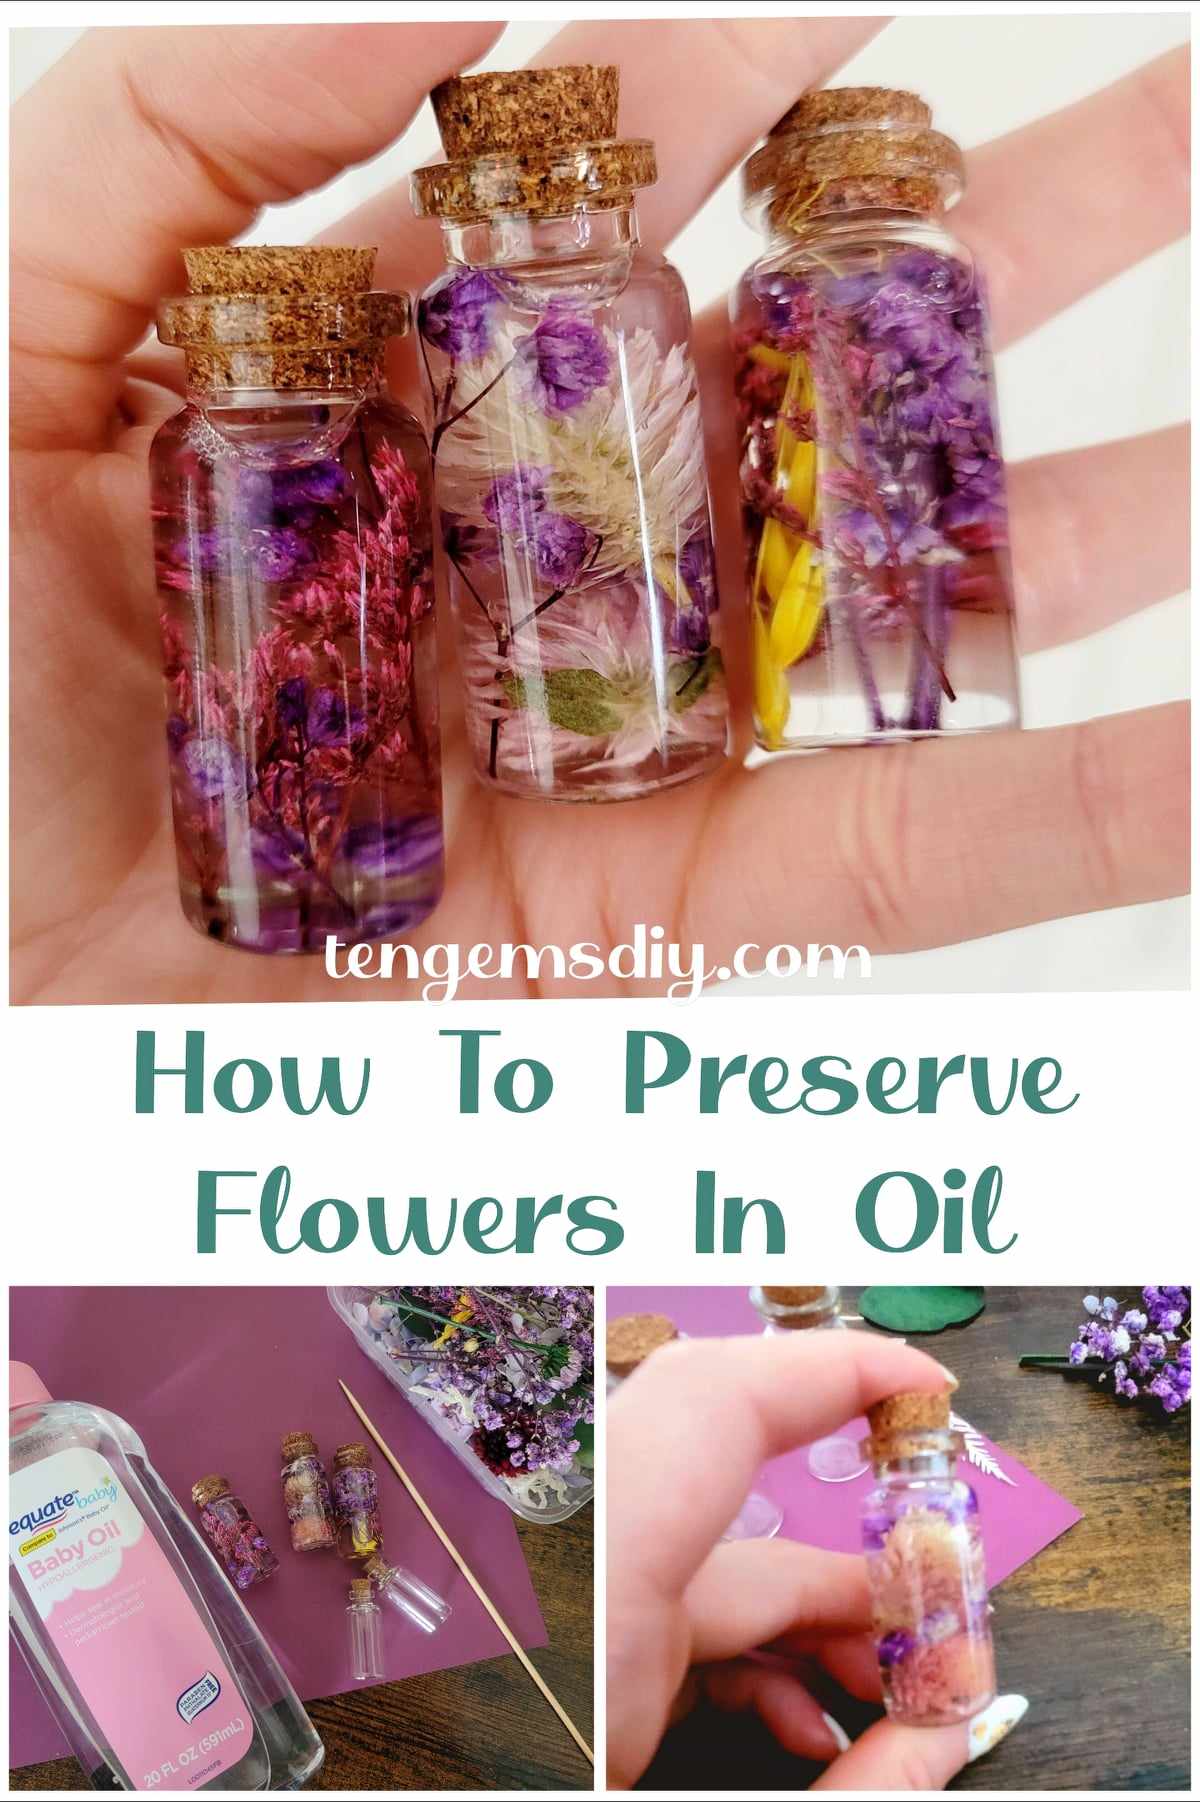 how to preserve flowers in oil, preserving flowers, how to preserve flowers, dried flower crafts, what can i do with dried flowers, flowers in bottles, dried flowers ideas, dried flowers aesthetic, mini bottle art, mini bottle bouquet, mini bottle crafts, mini bottle gift ideas, floral art, herbarium, flower bottles, what to do with mineral oil, cute miniature diy, dried flowers in a bottle, mothers day gifts, gifts for best friend, easy diy flower gifts, diy flower home decor, diy trinket, can you put fresh flowers in oil, flowers in oil bottle, trending crafts, crafts to make and sell, what is herbarium oil made of, dried flower art,